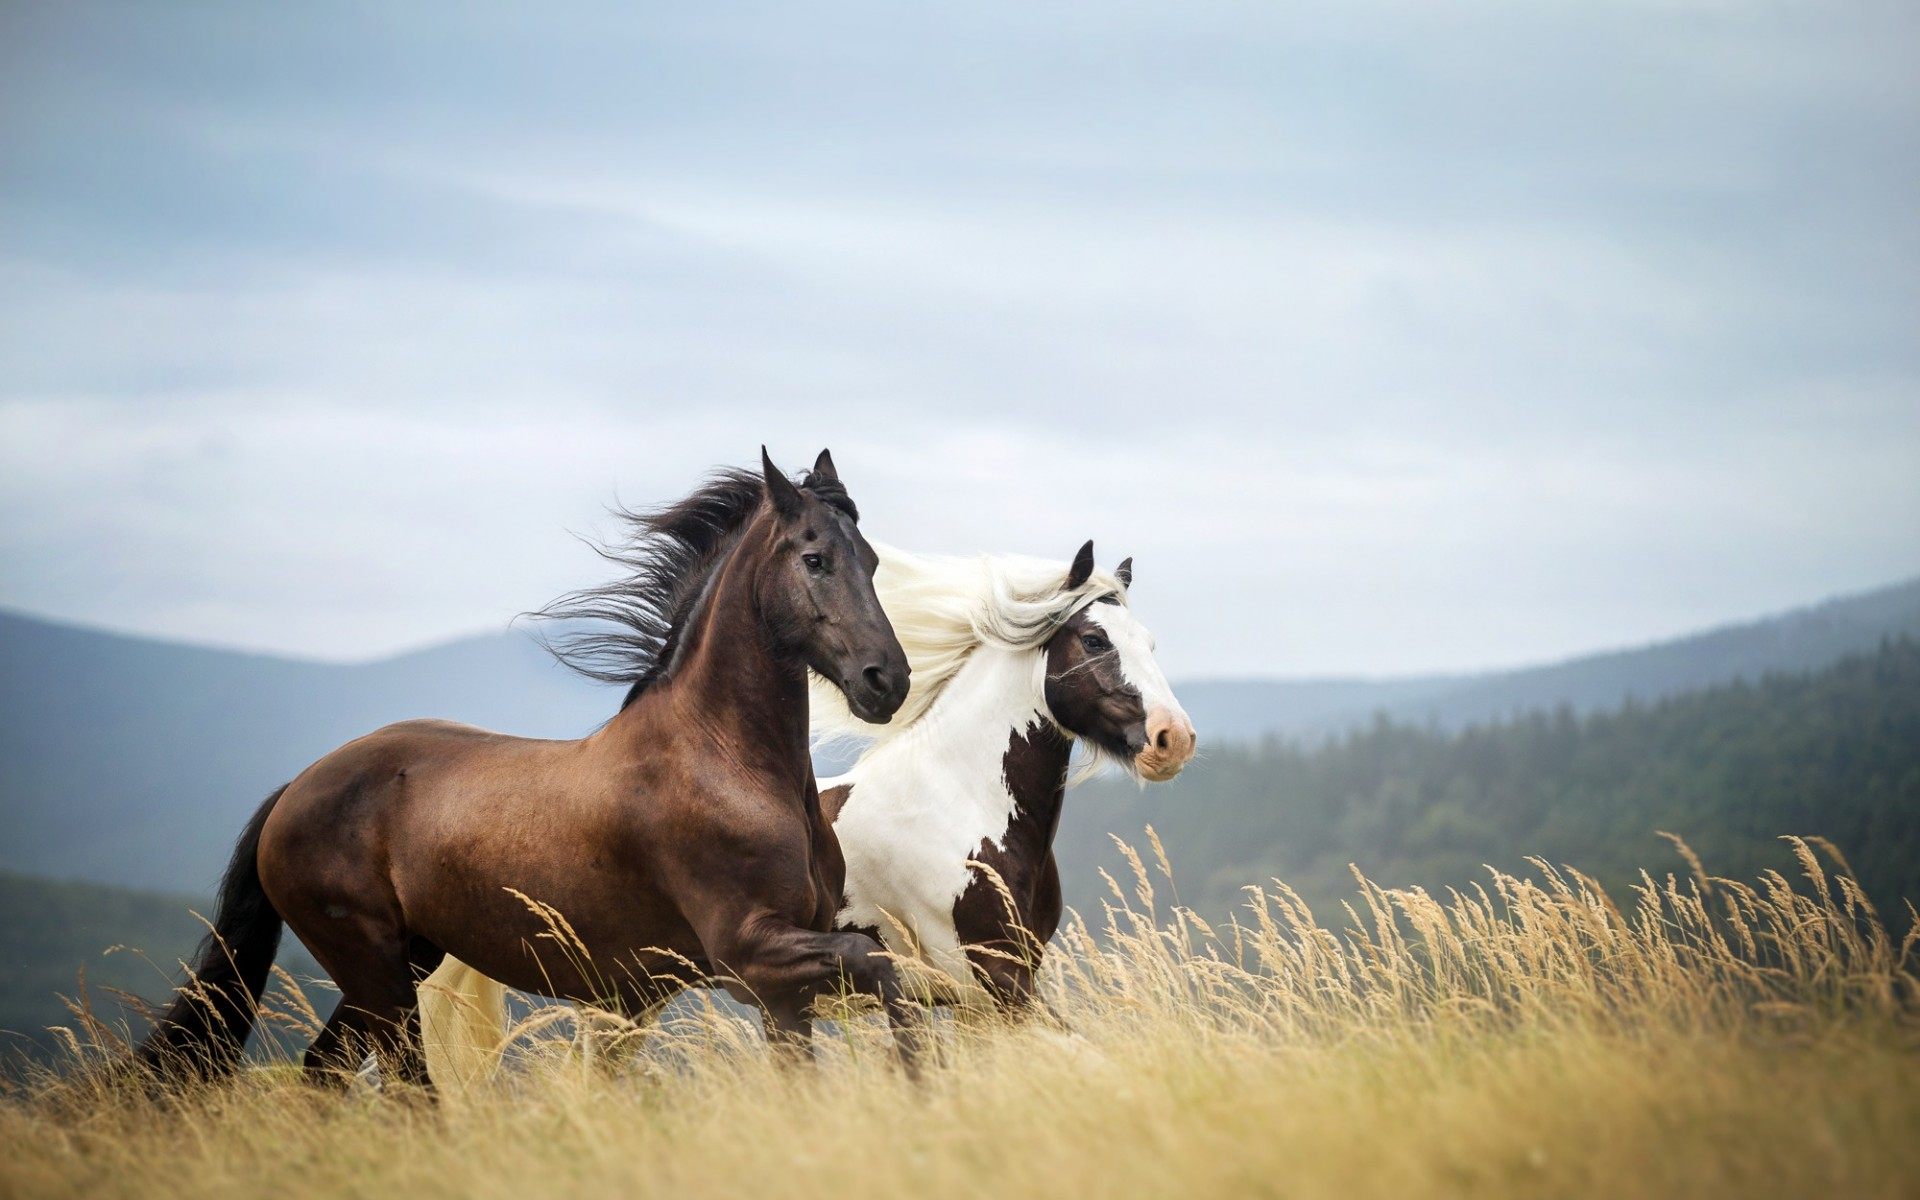 Two Horses Running In Nature Dry Reed Grass Hd Wallpaper : Wallpapers13.com